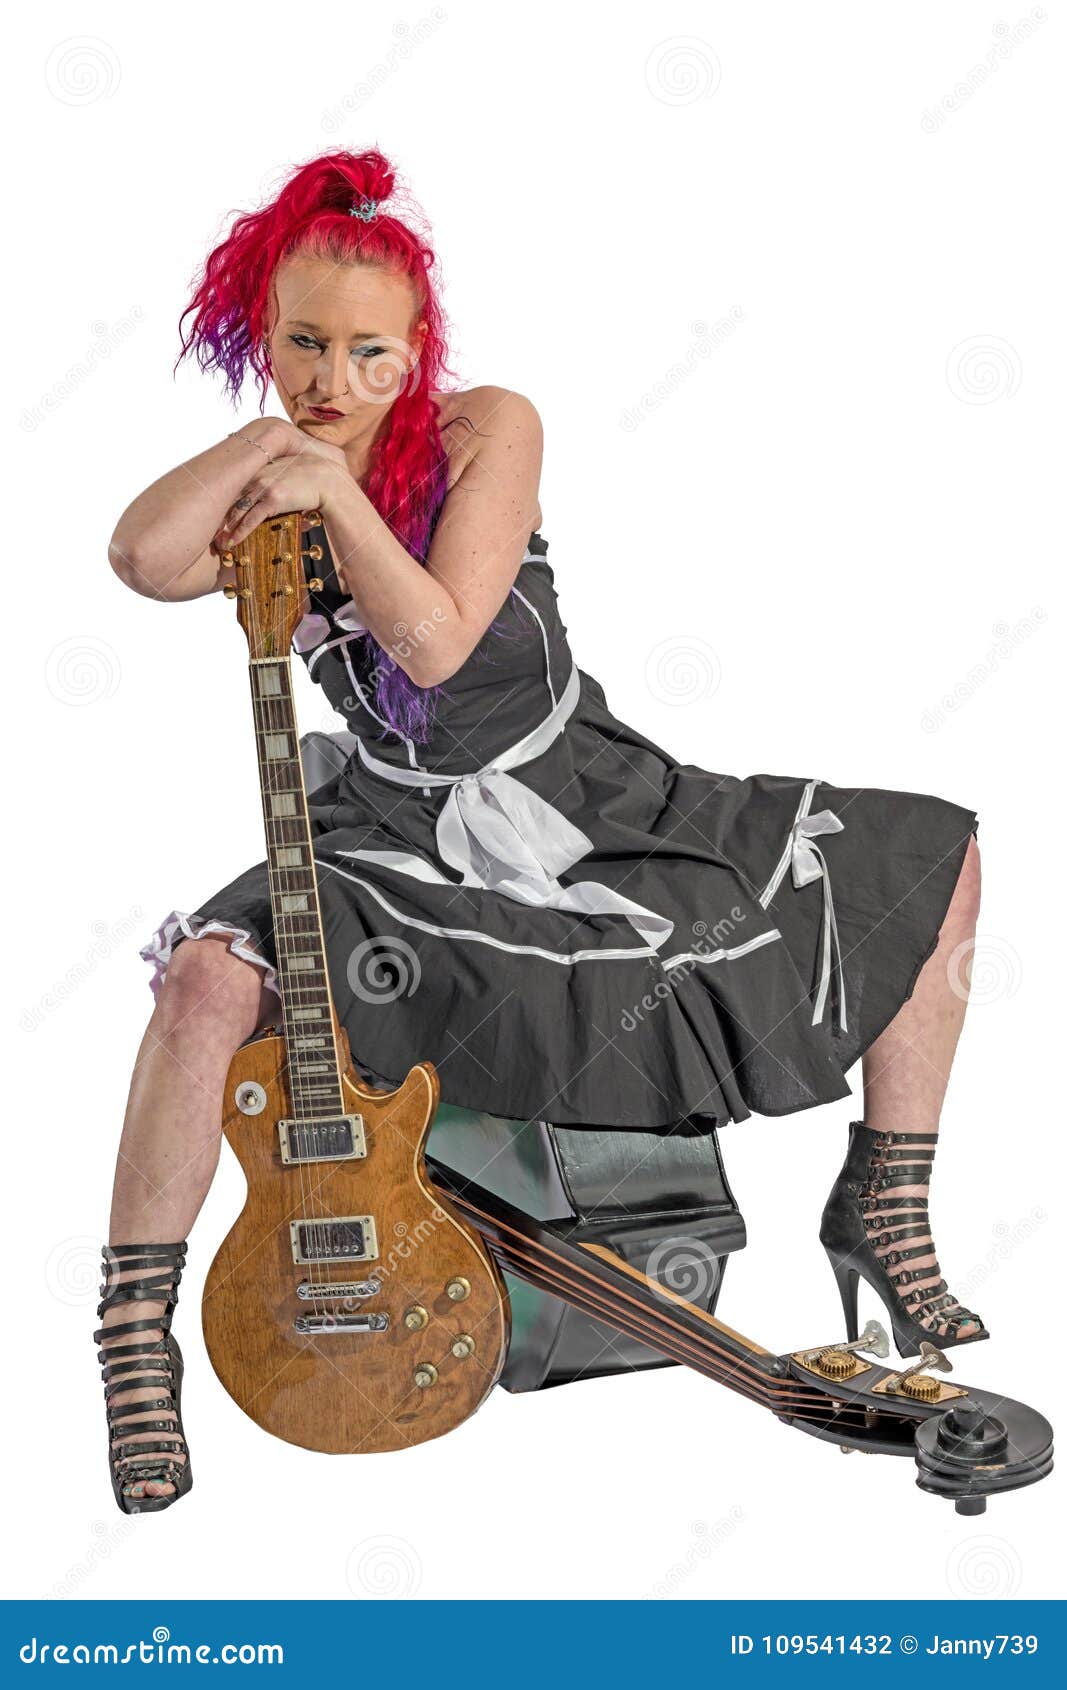 Rock N Roll Singer With Red Hair Sits On A Double Bass Stock Photo Image Of Rockabilly Dress 109541432